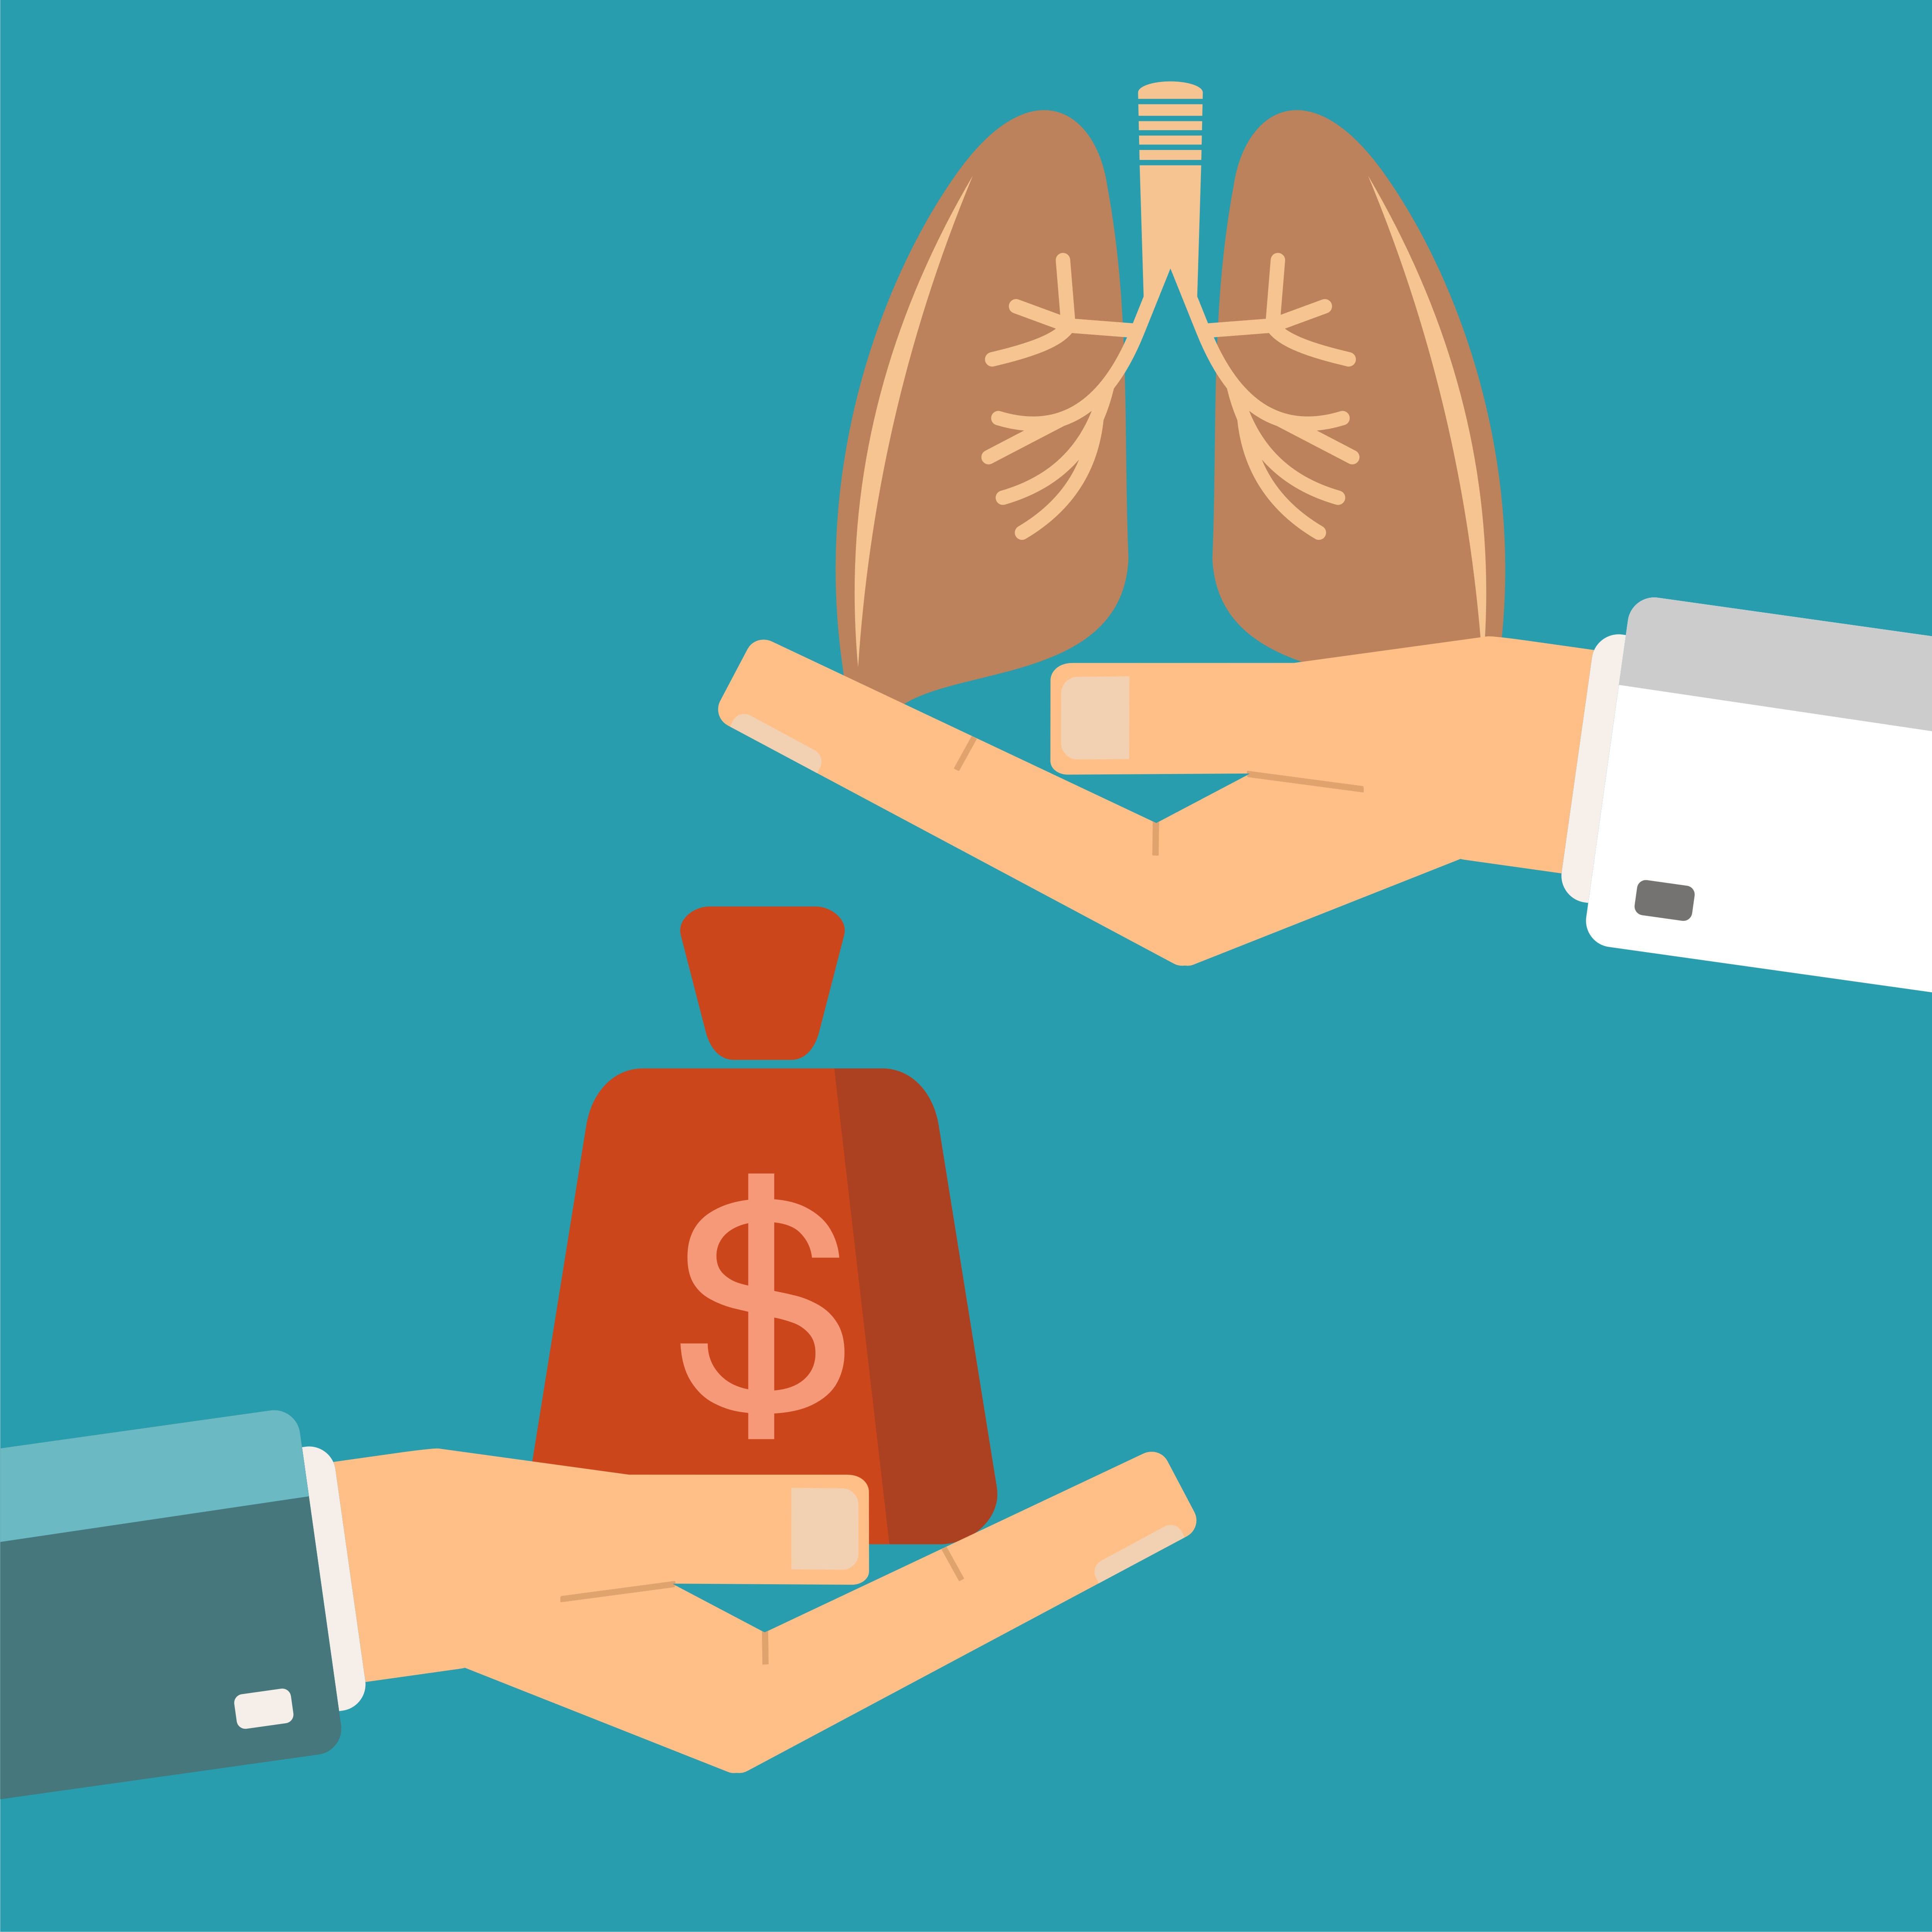 Money exchanged for lung health